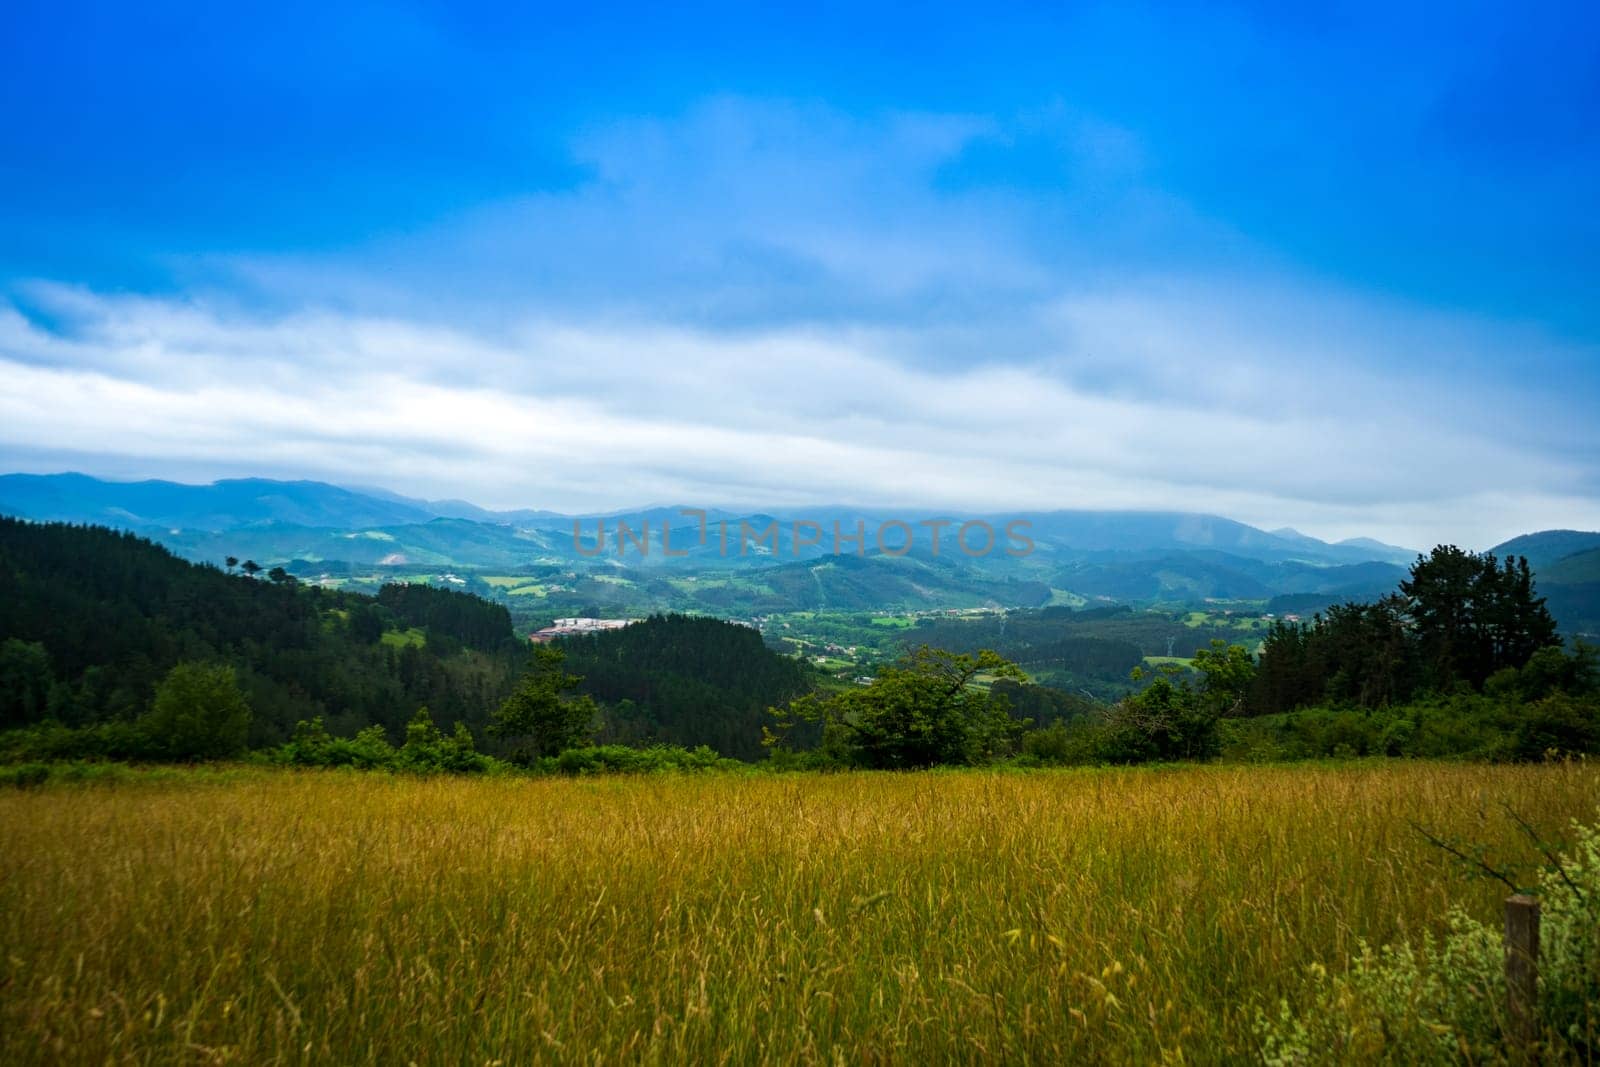 landscape in mountains. grassy field and rolling hills out of focus. rural scenery. Basque country, Spain